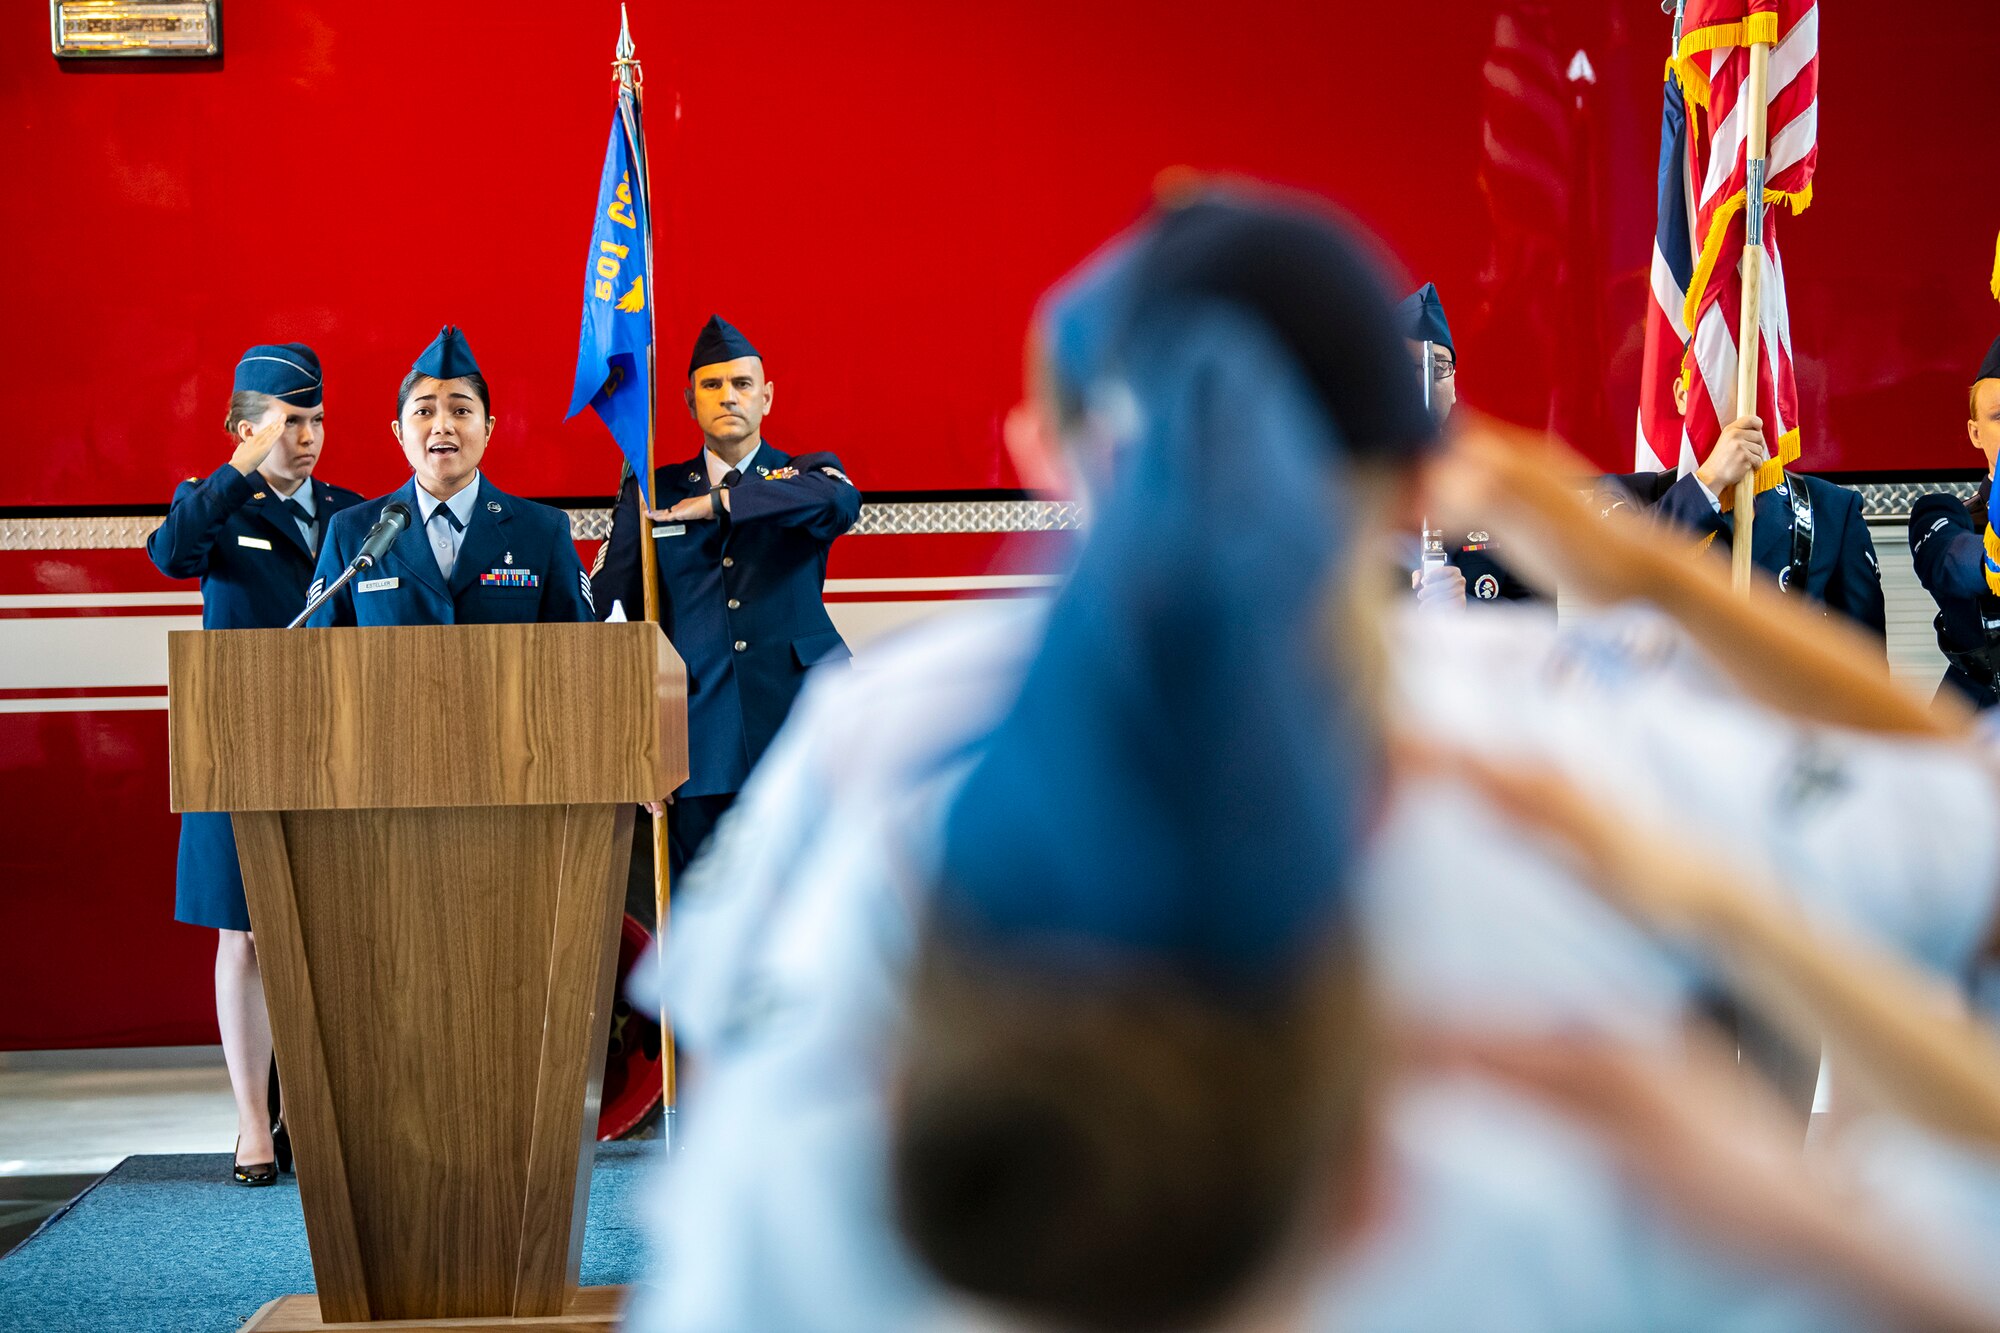 U.S. Air Force Staff Sgt. Bloom Esteller, left, 423d Medical Squadron dental assistant, sings the national anthem during a change of command ceremony at RAF Alconbury, England, July 25, 2022. The ceremony is a military tradition that represents a formal transfer of a unit’s authority from one commander to another. (U.S. Air Force photo by Staff Sgt. Eugene Oliver)